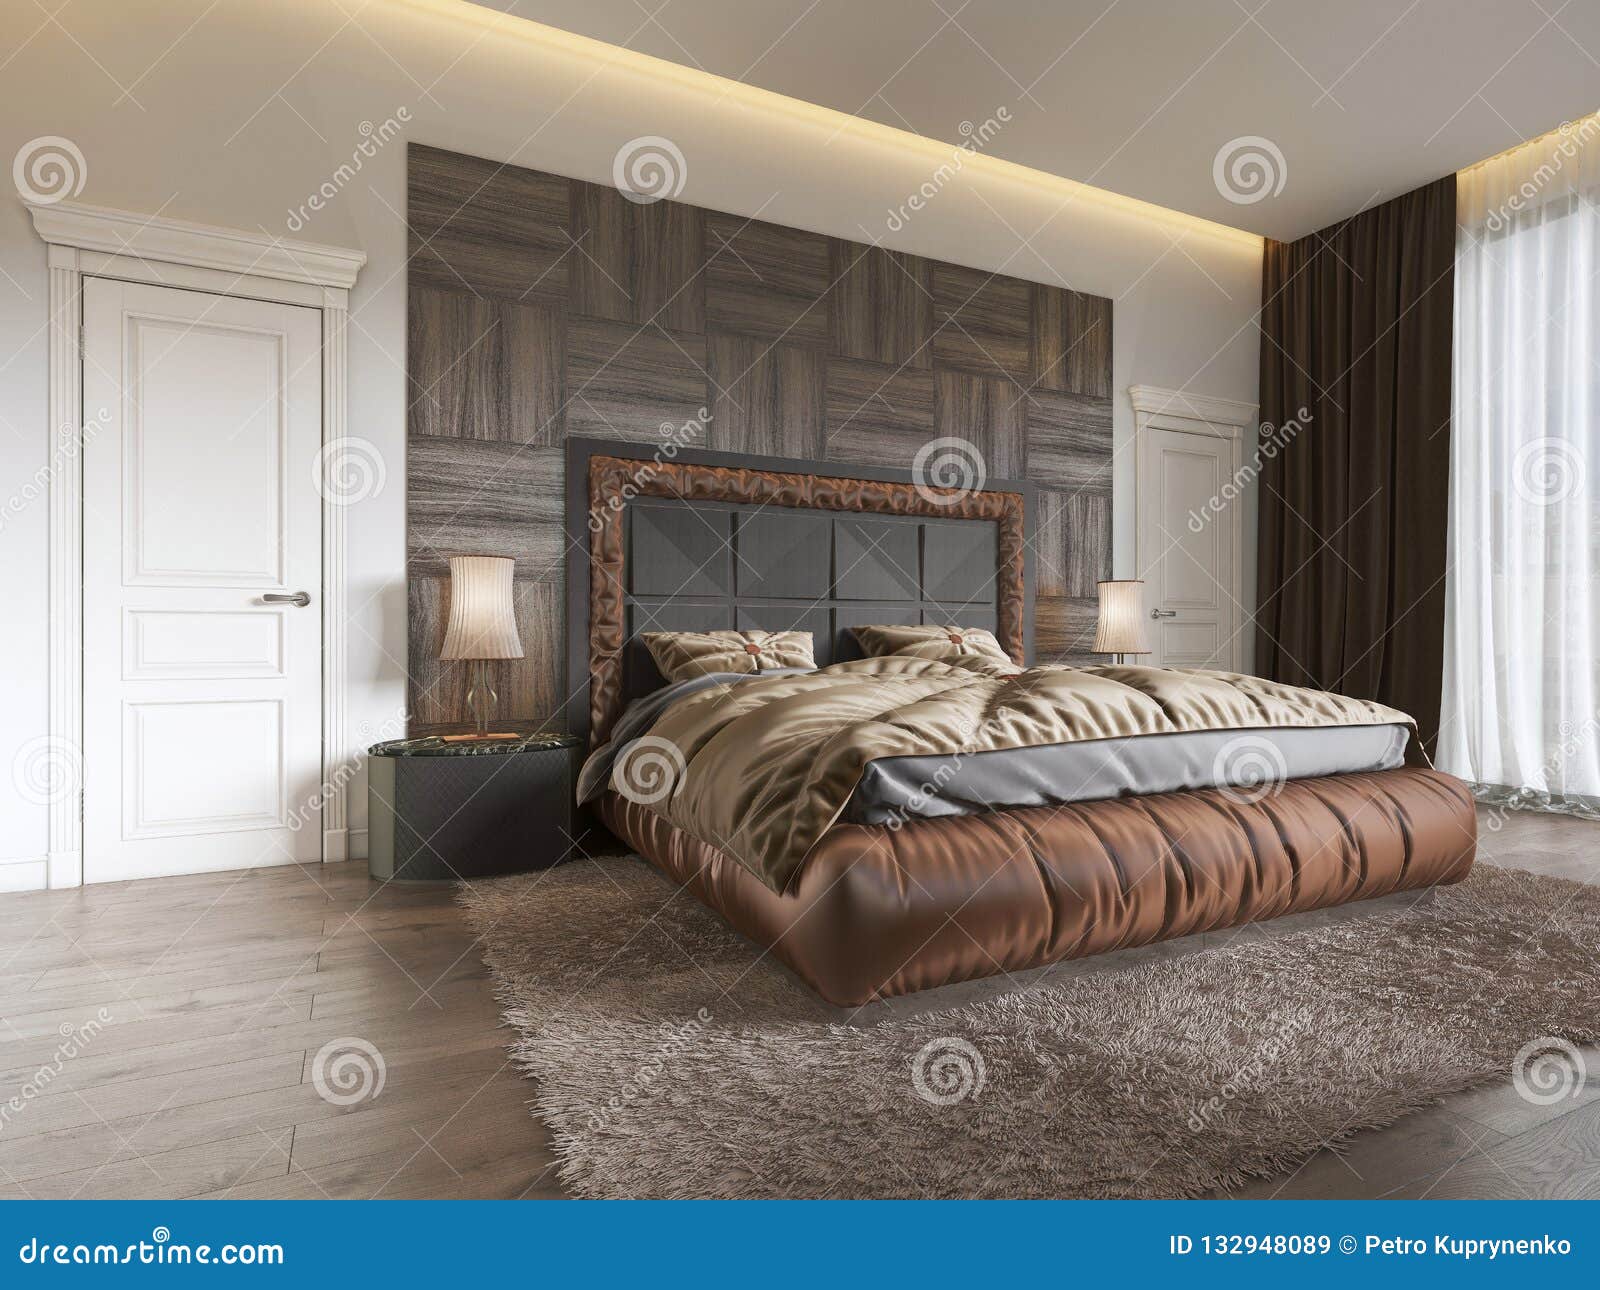 Luxurious Bedroom In Modern Style With Large Windows In The